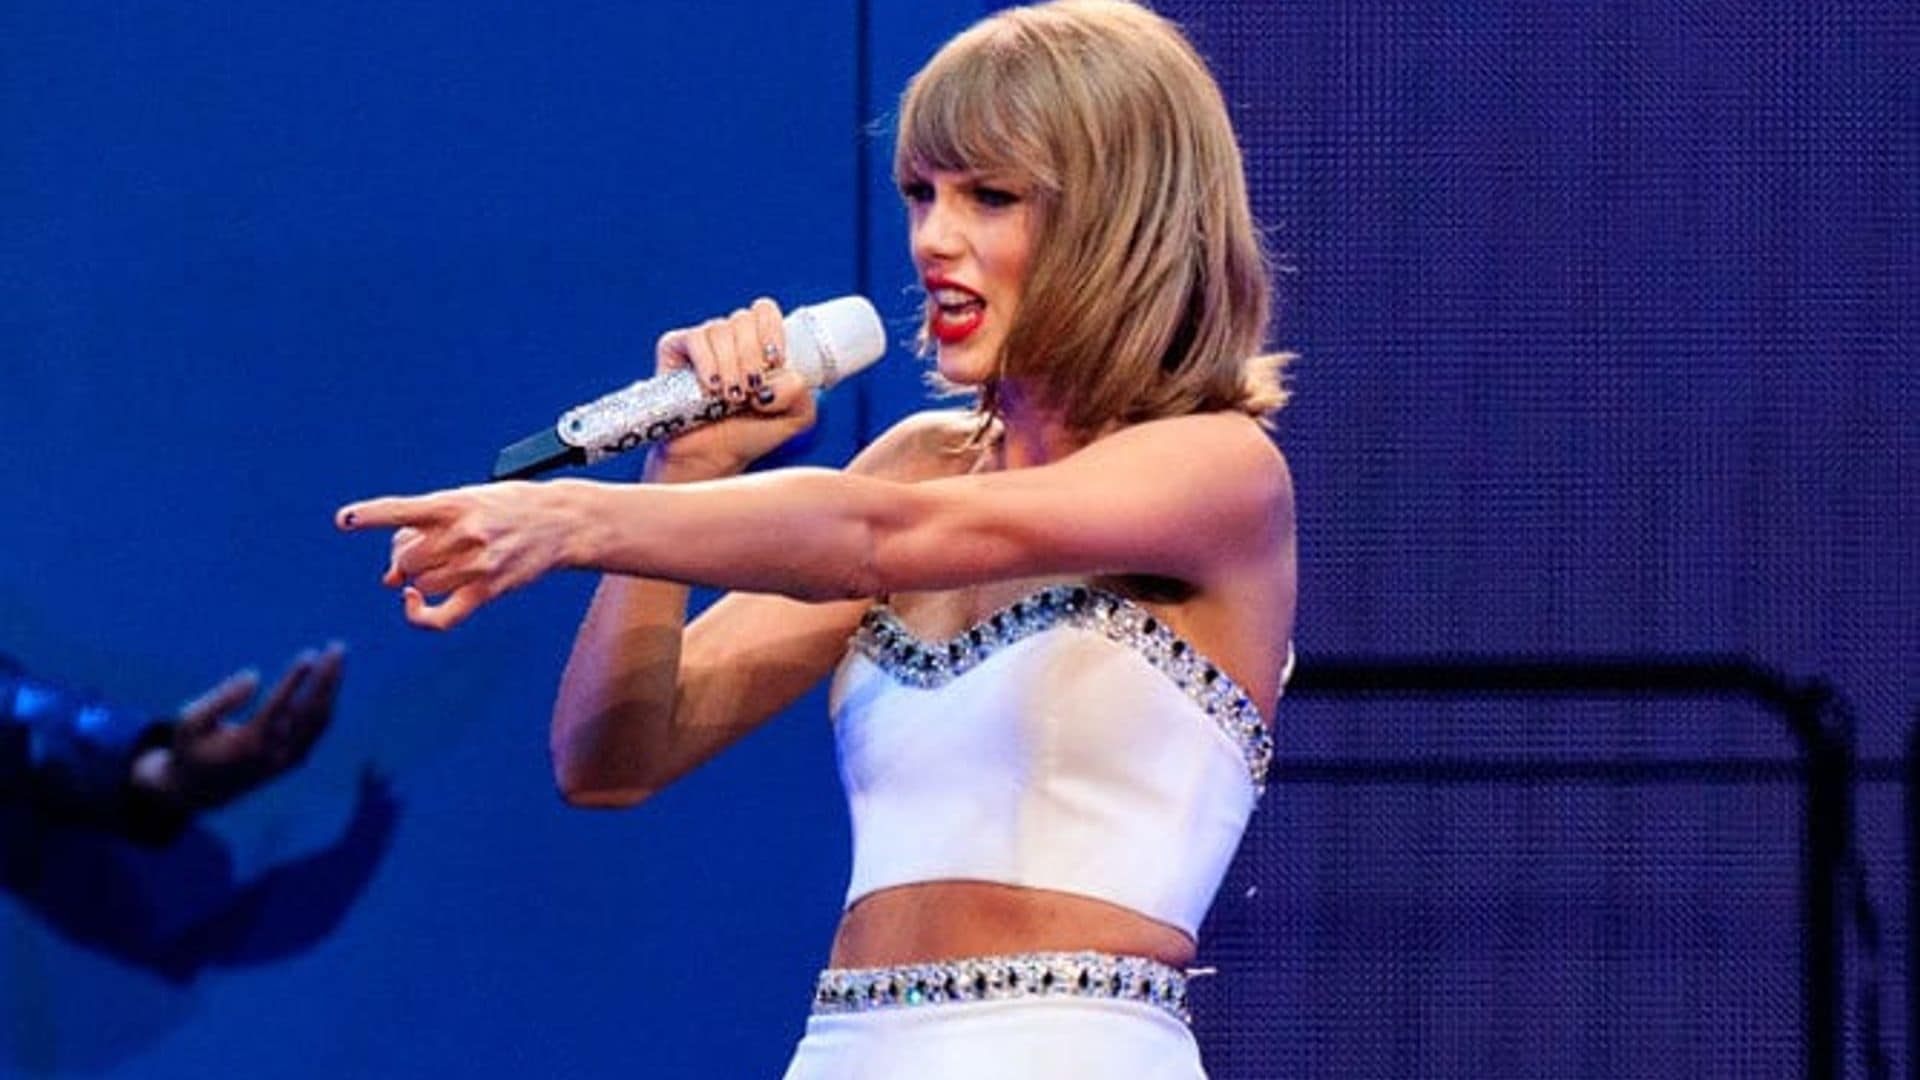 Taylor Swift mouths 'I love you' to Calvin Harris at concert